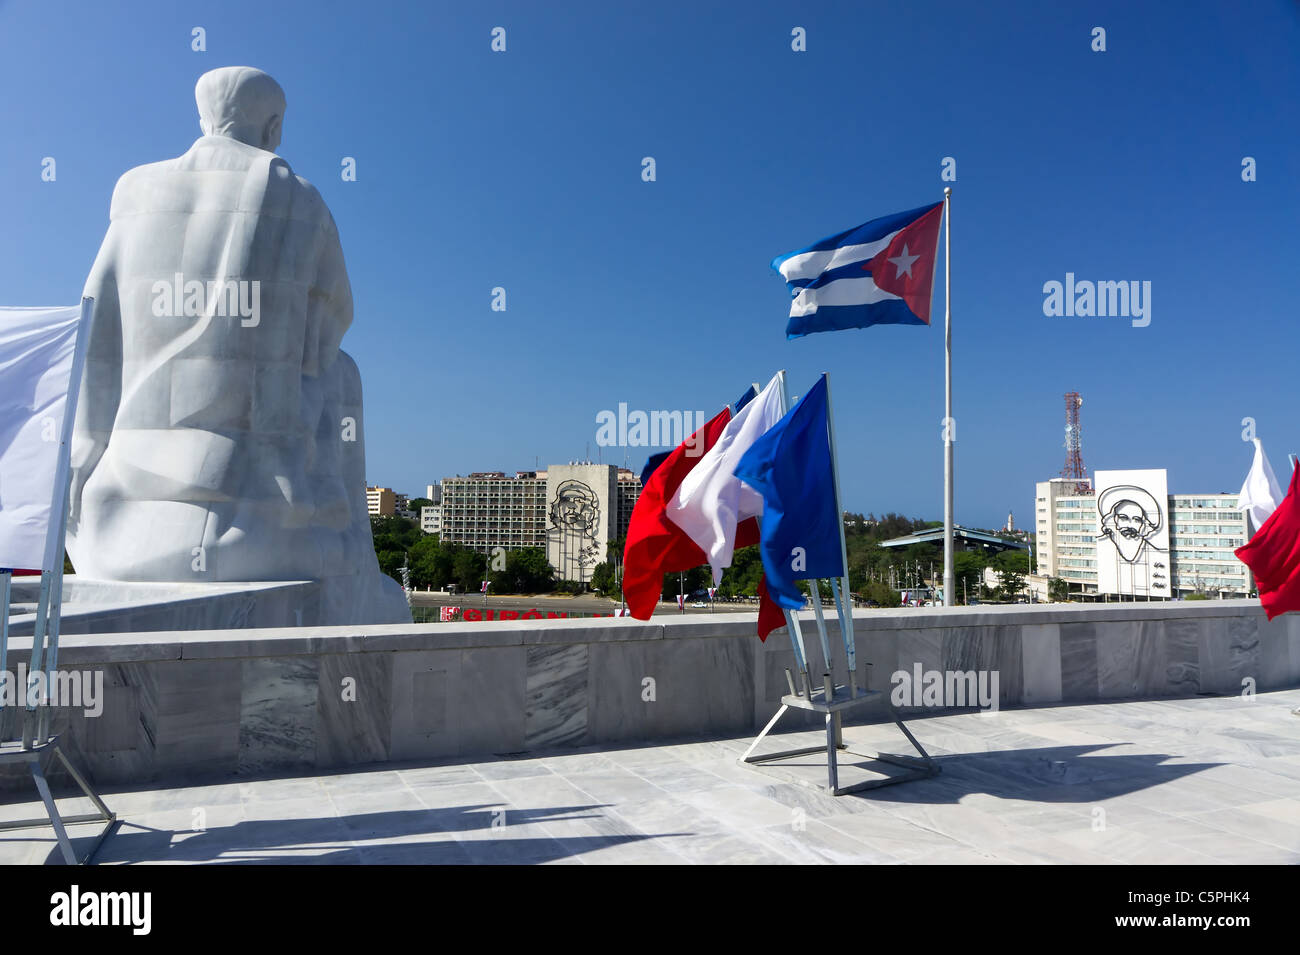 Jose Marti overlooking the Plaza de la Revolución - Ministry of Interior & Ministry of Informatics and Communications buildings. Stock Photo